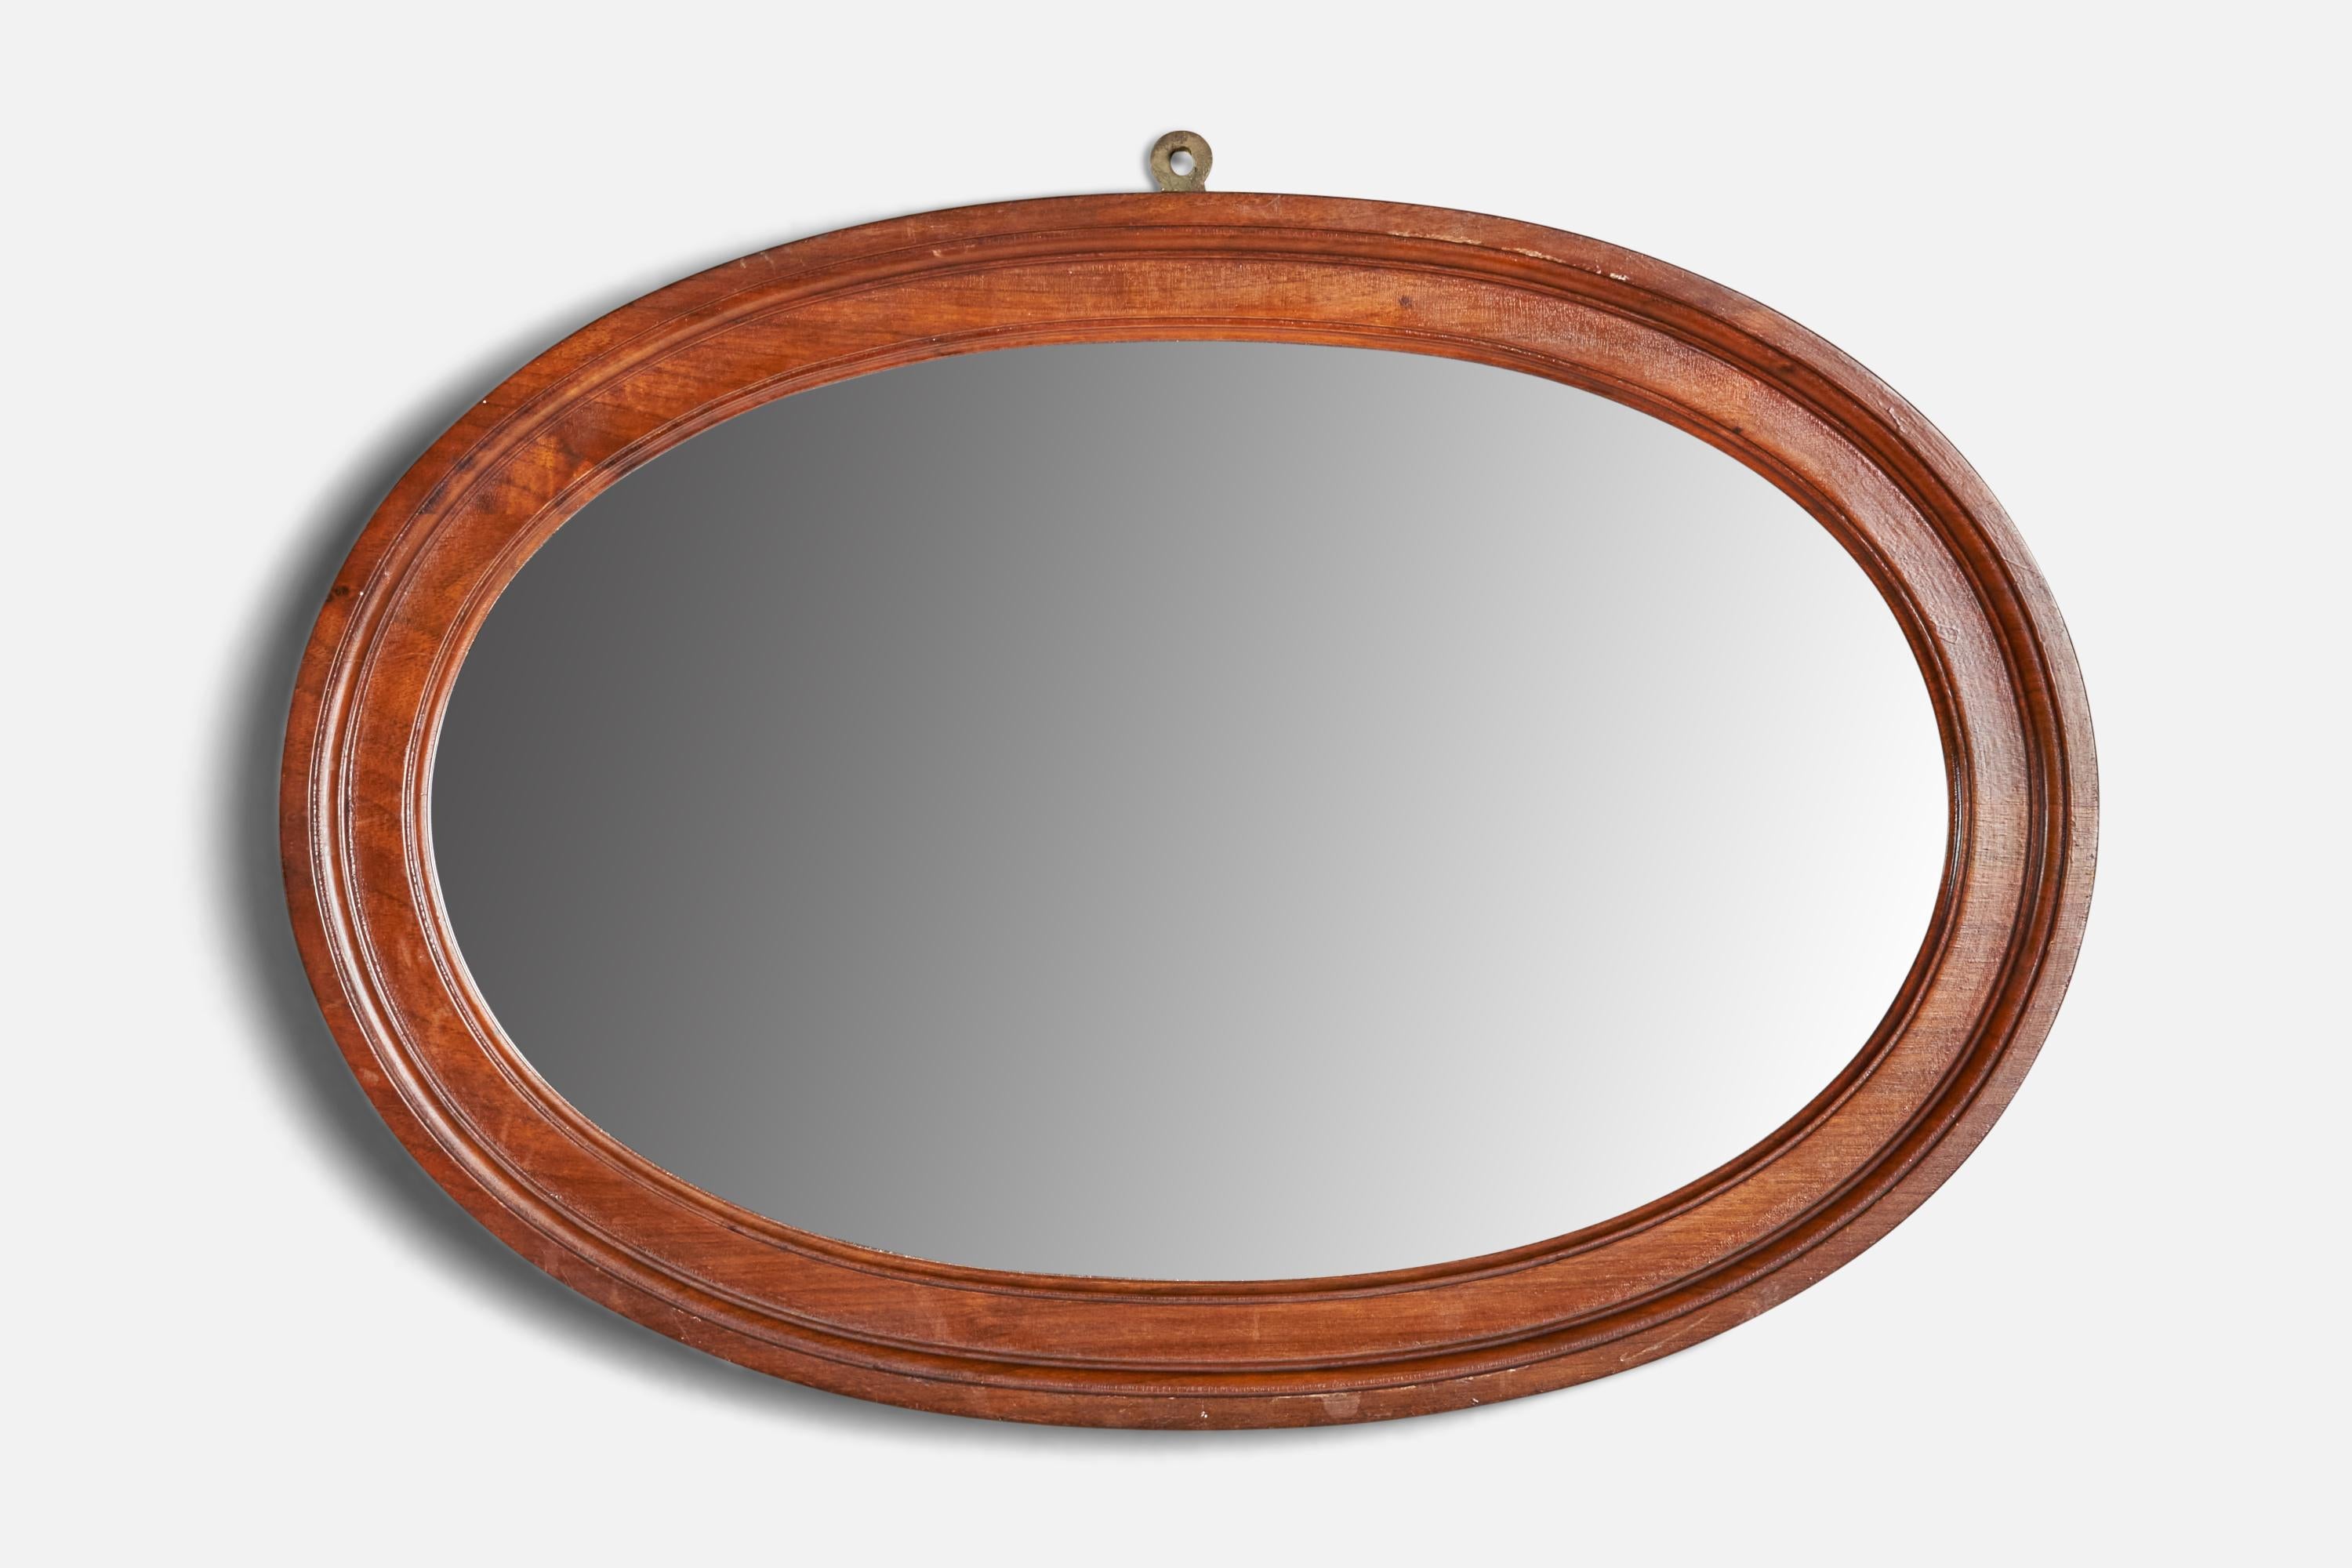 A walnut wall mirror designed and produced in Sweden, c. 1930s.